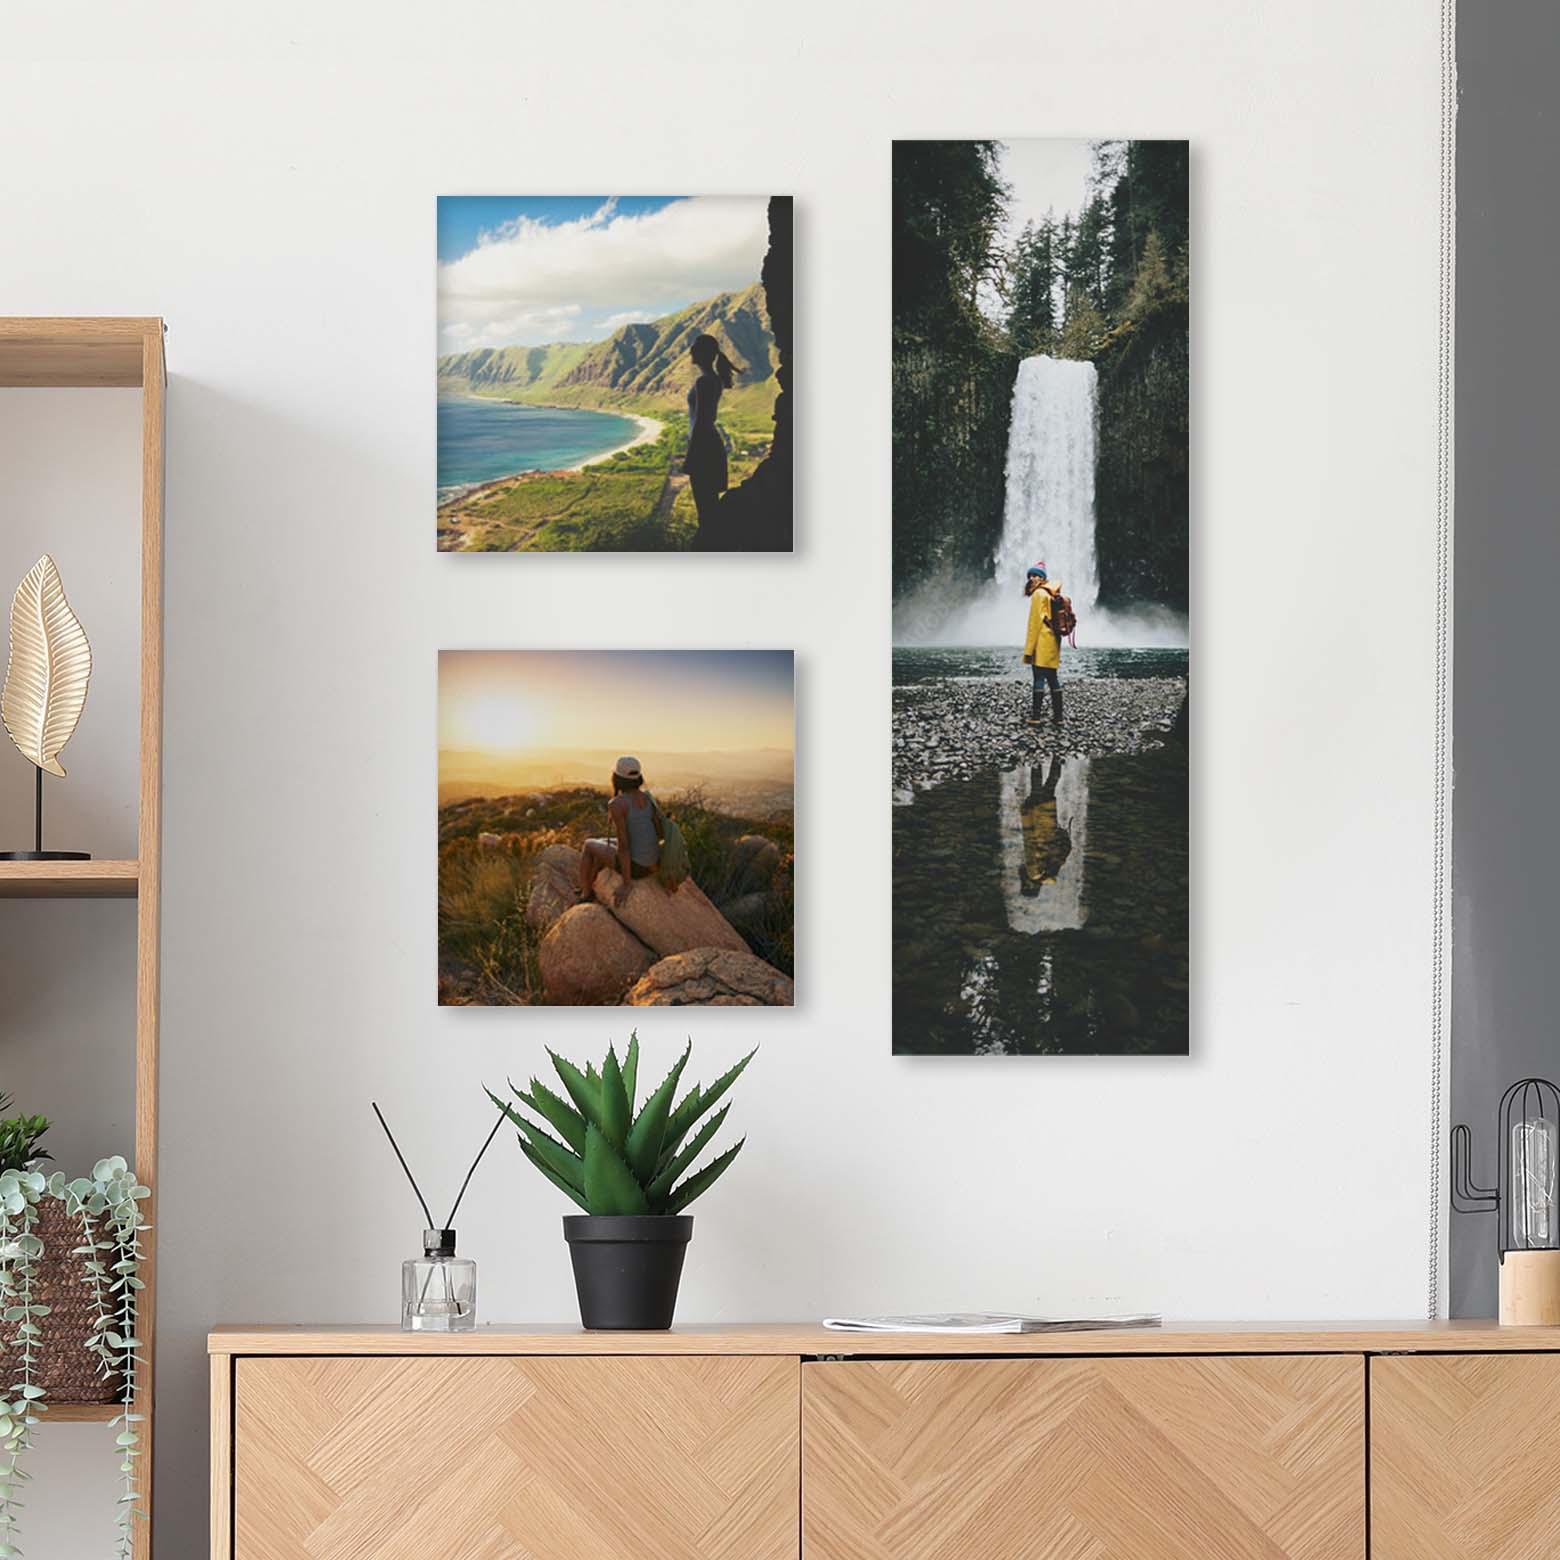 Three pictures arranged on the wall - two 10x10 and one 8x24